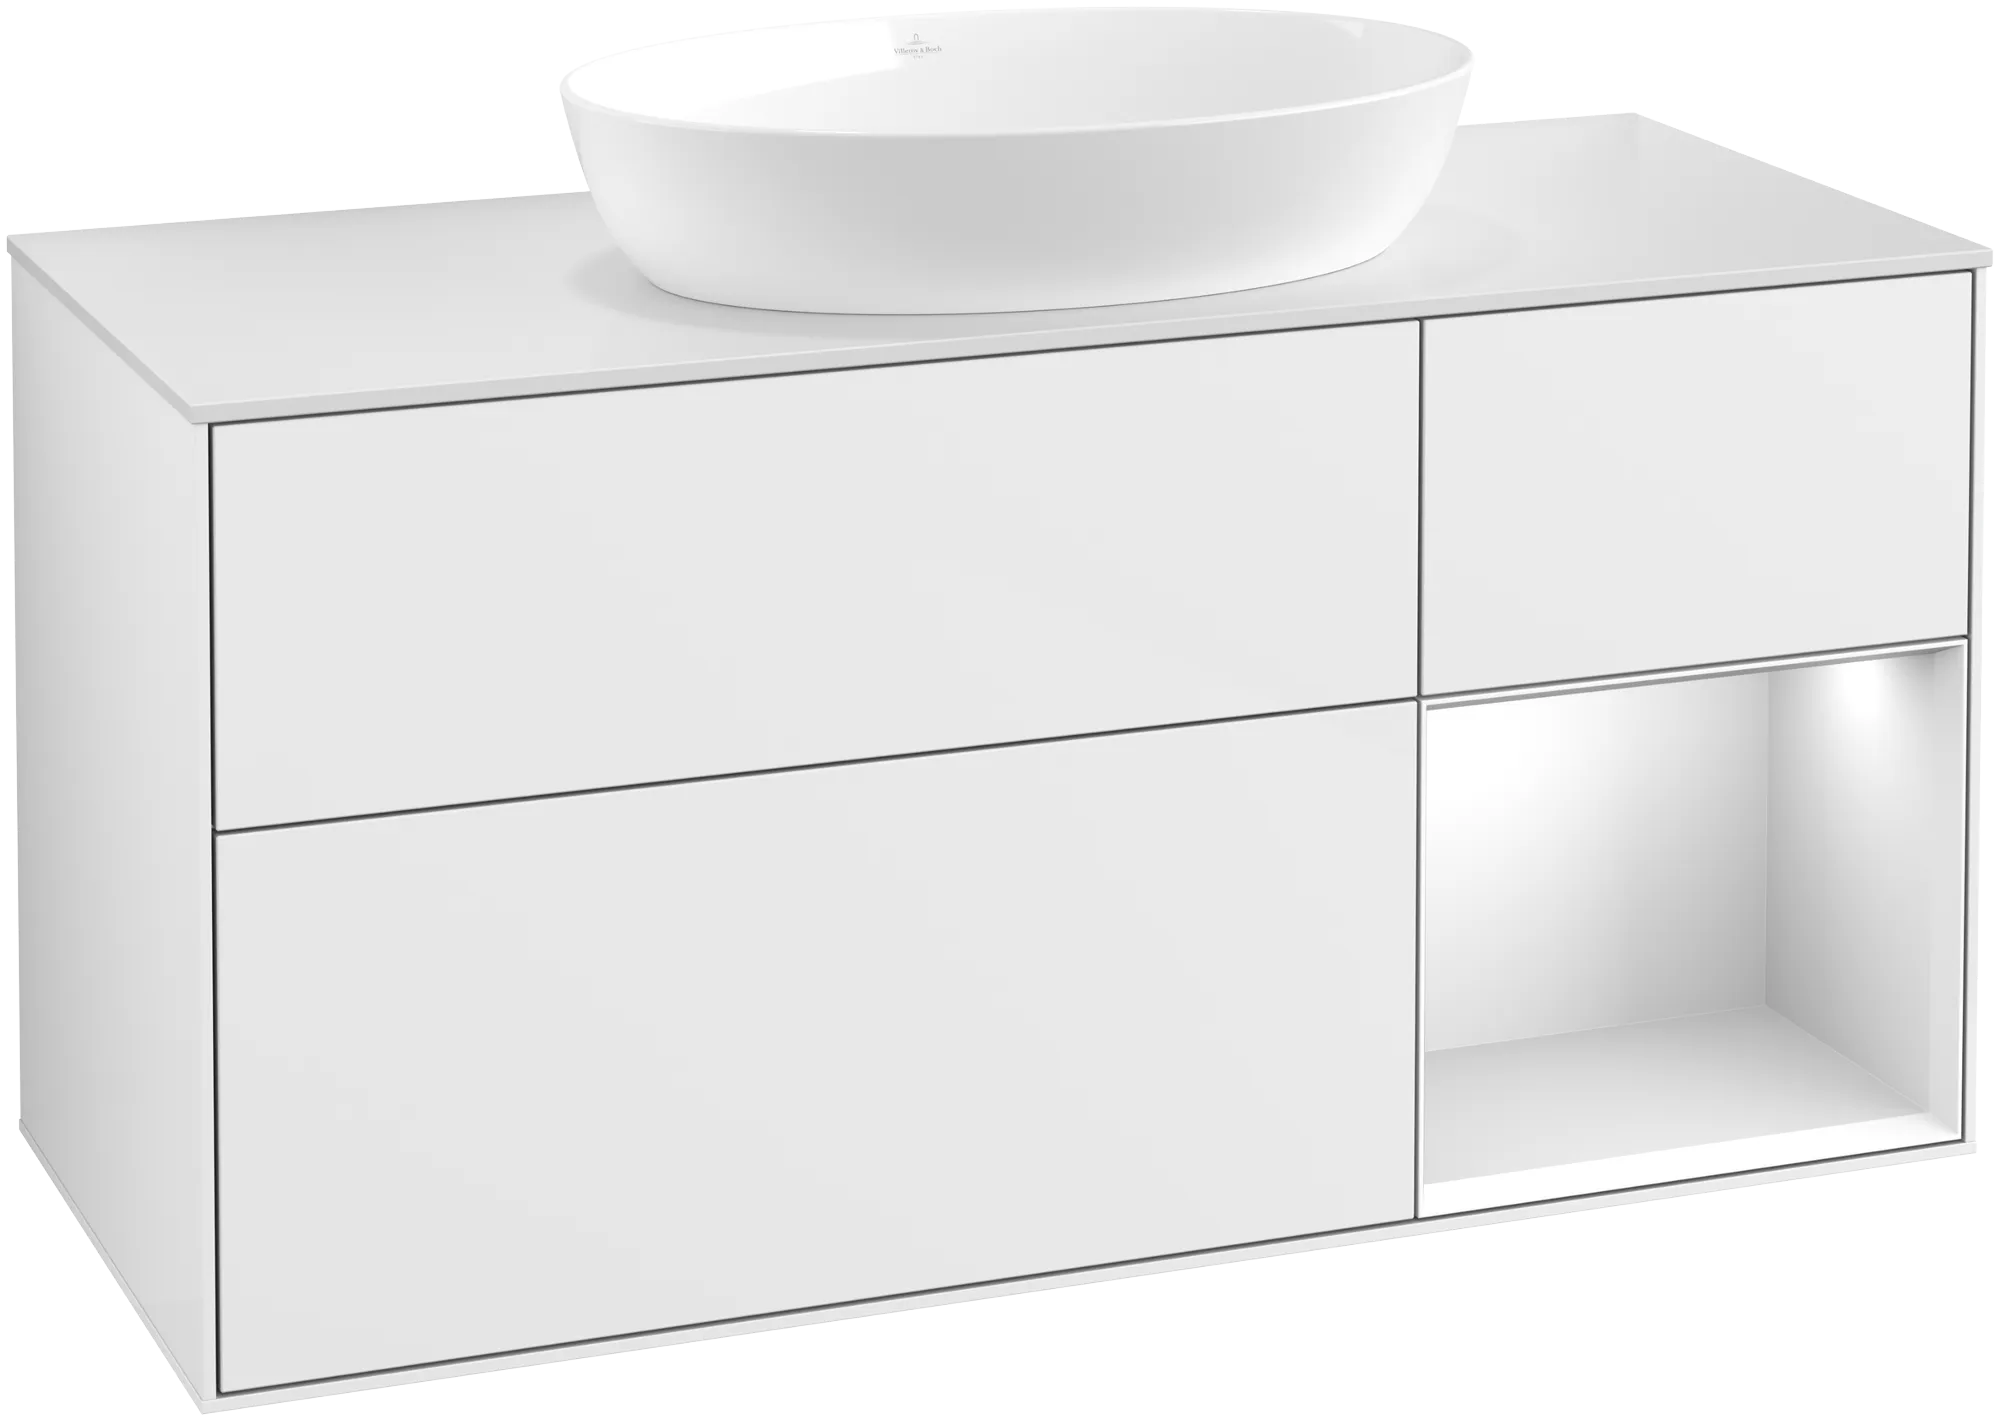 Obrázek VILLEROY BOCH Finion Vanity unit, with lighting, 3 pull-out compartments, 1200 x 603 x 501 mm, Glossy White Lacquer / White Matt Lacquer / Glass White Matt #GA71MTGF